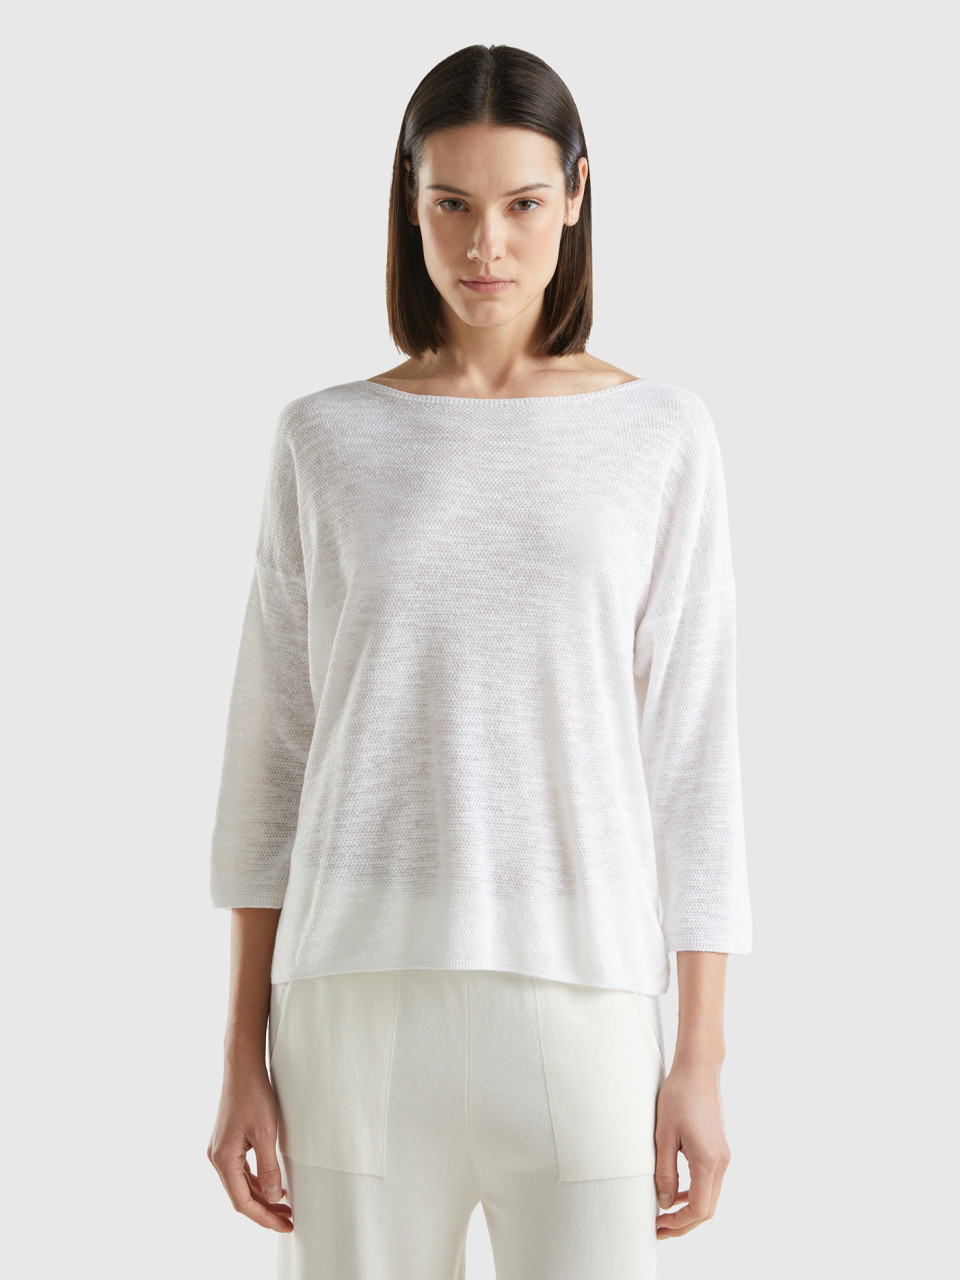 Benetton, Sweater In Linen Blend With 3/4 Sleeves, White, Women